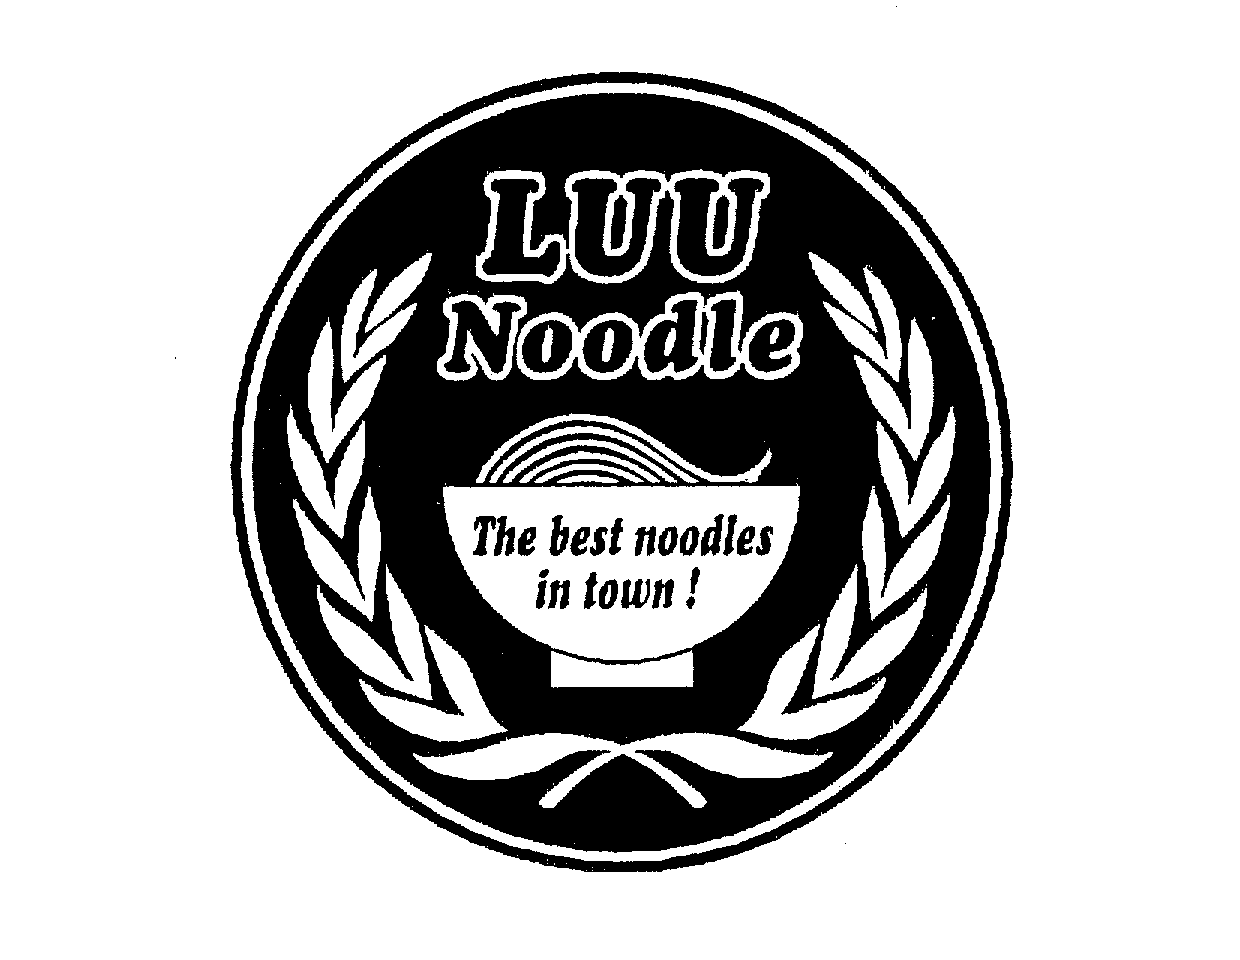  LUU NOODLE THE BEST NOODLES IN TOWN !